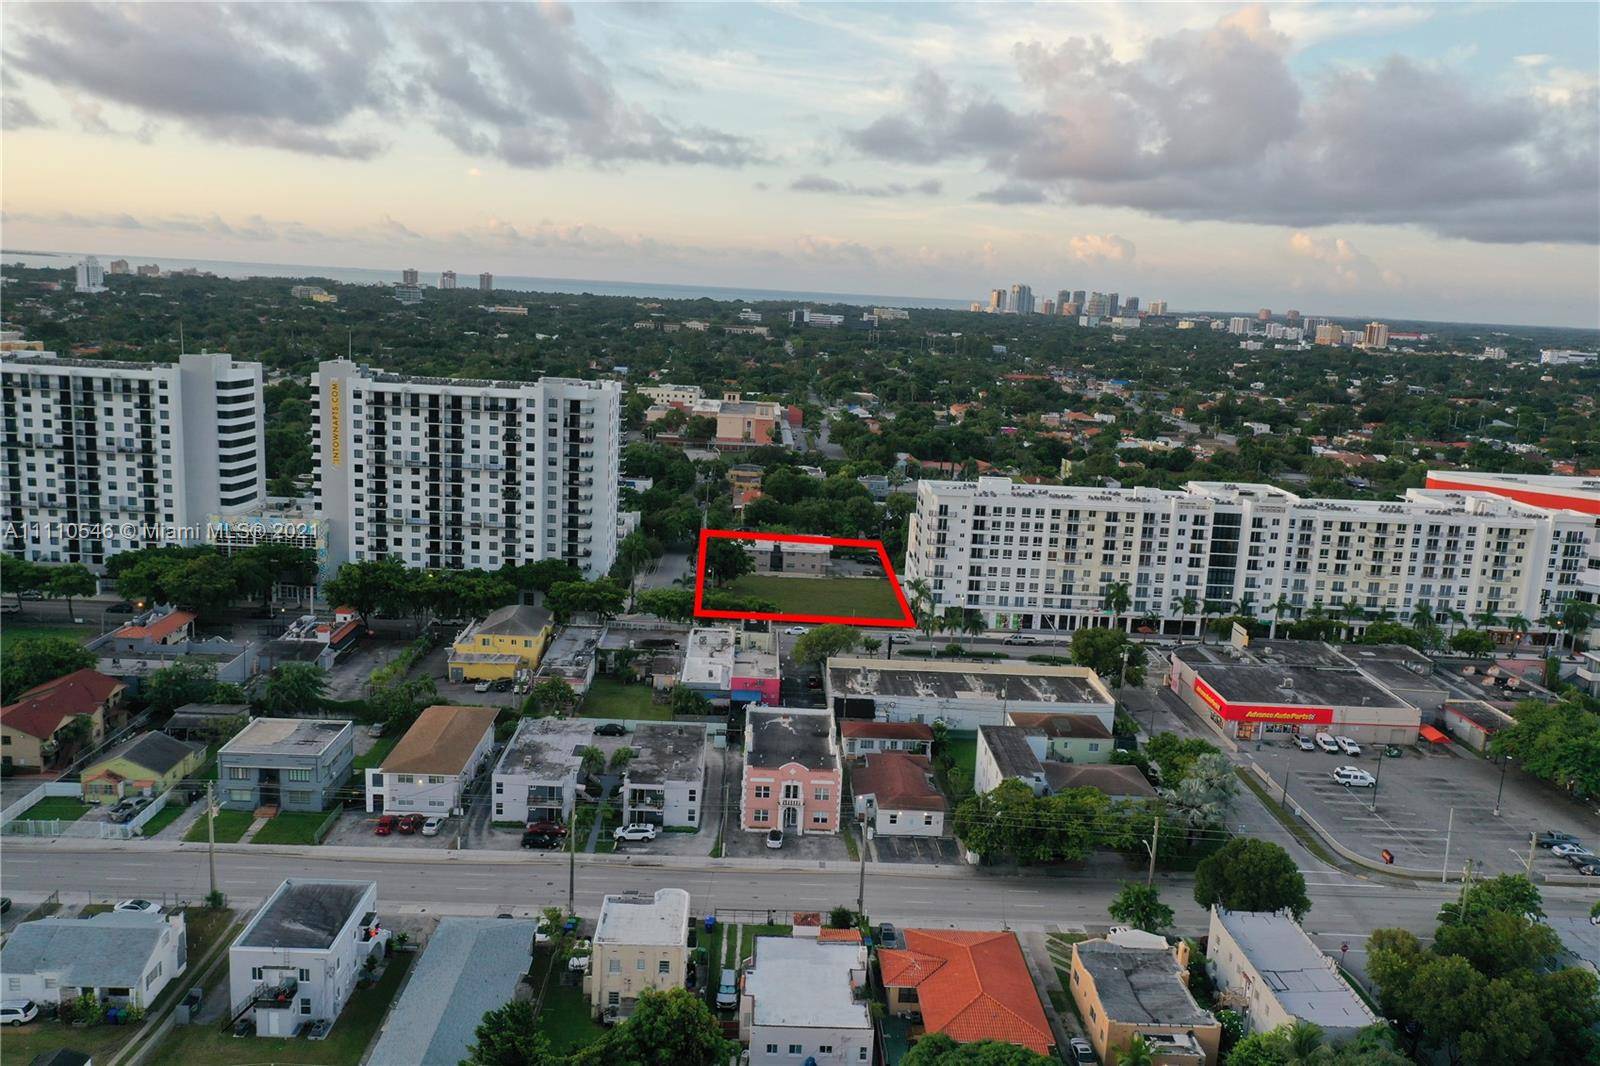 An exclusive opportunity to purchase a development site with 39, 975 SF with zoning permitting up to 150 units per acre to be built, or up to 300 hotel units ...